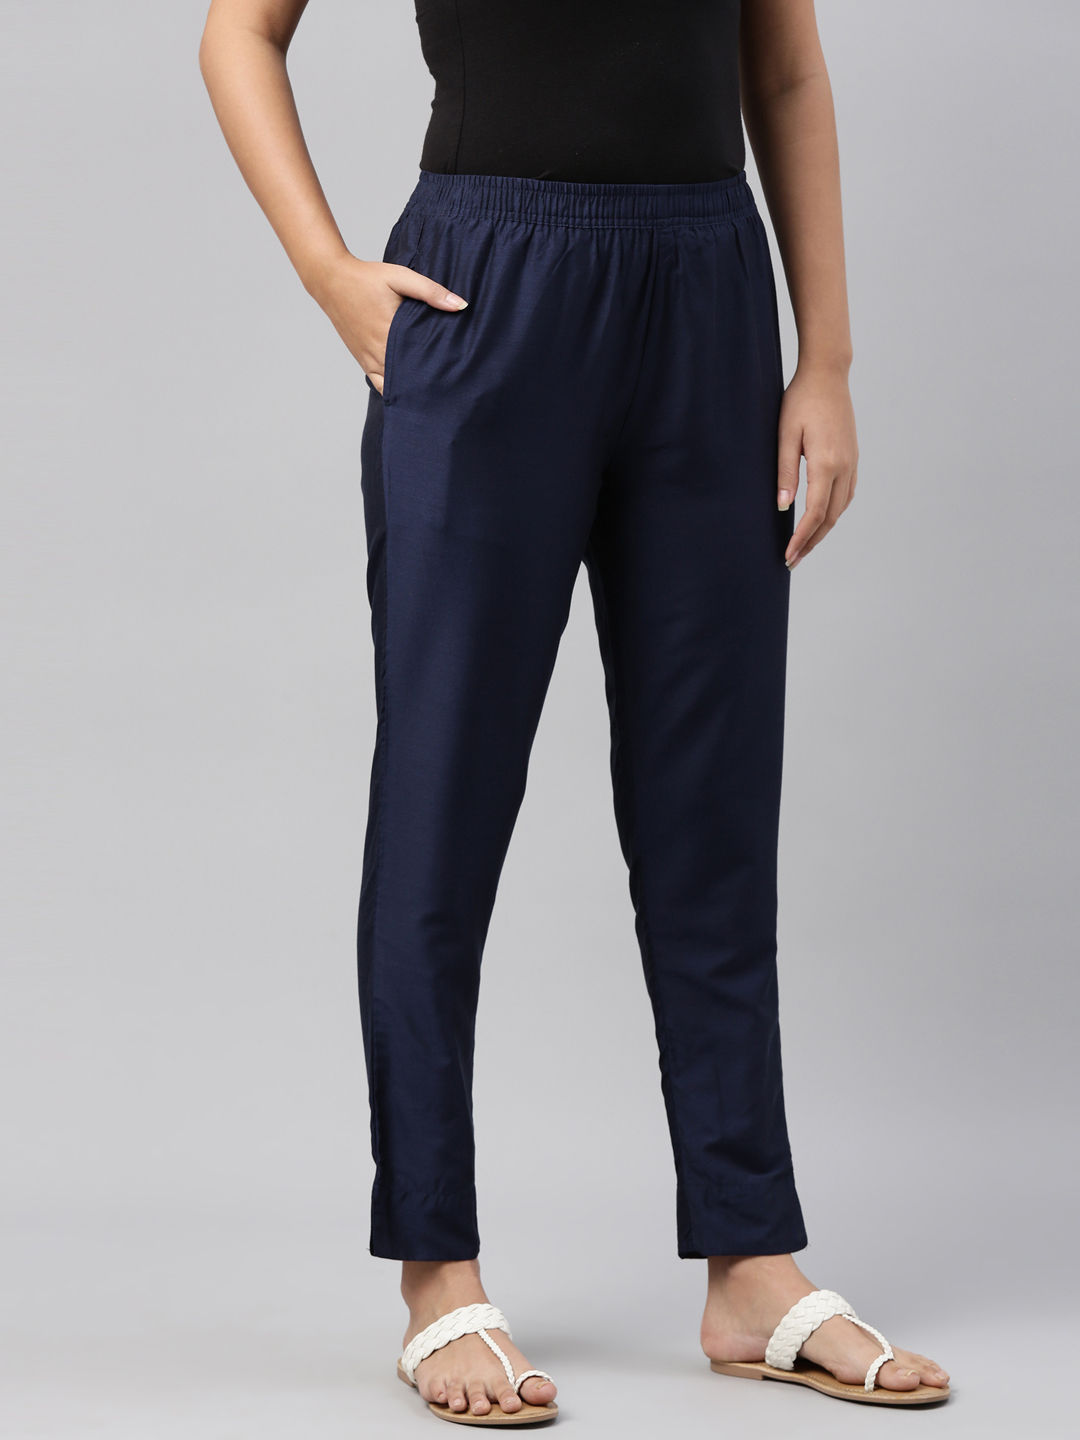 Buy Navy Blue Track Pants for Women by ALLEN SOLLY Online | Ajio.com